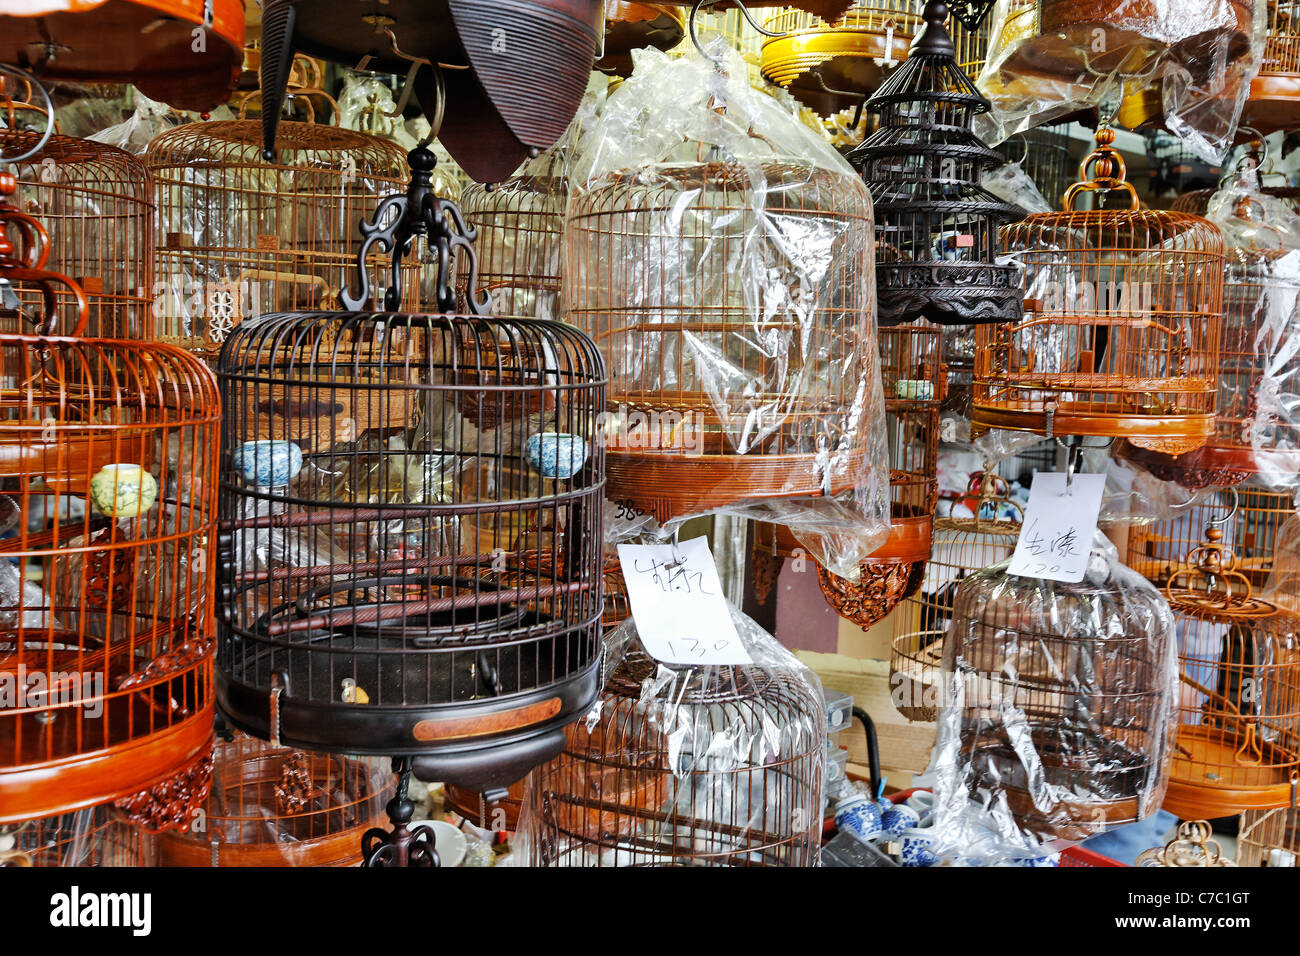 Bird cages for sale in Yuen Po Street Bird Garden, Kowloon, Hong Kong SAR, People's Republic of China, Asia Stock Photo